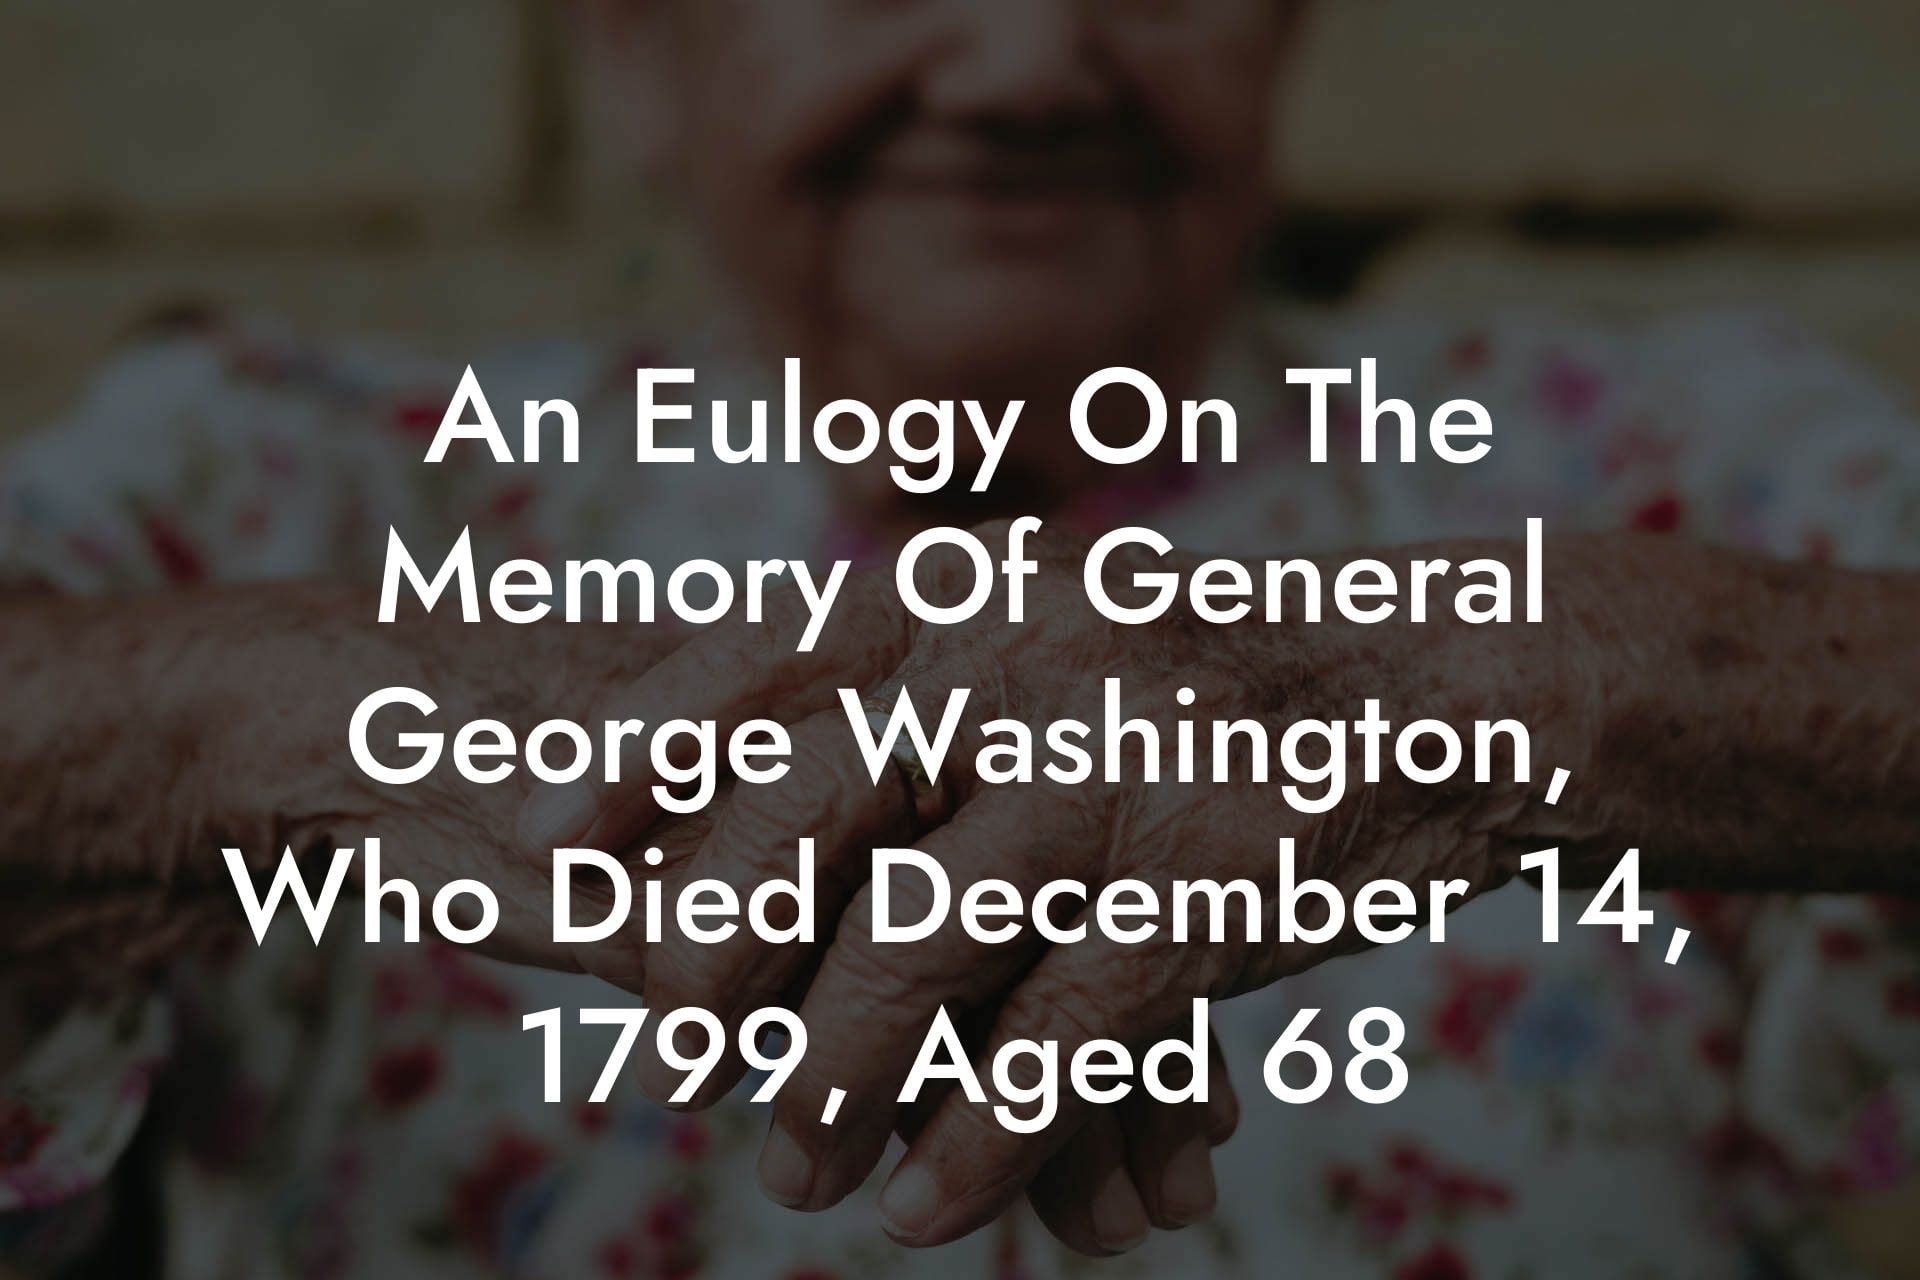 An Eulogy On The Memory Of General George Washington, Who Died December 14, 1799, Aged 68